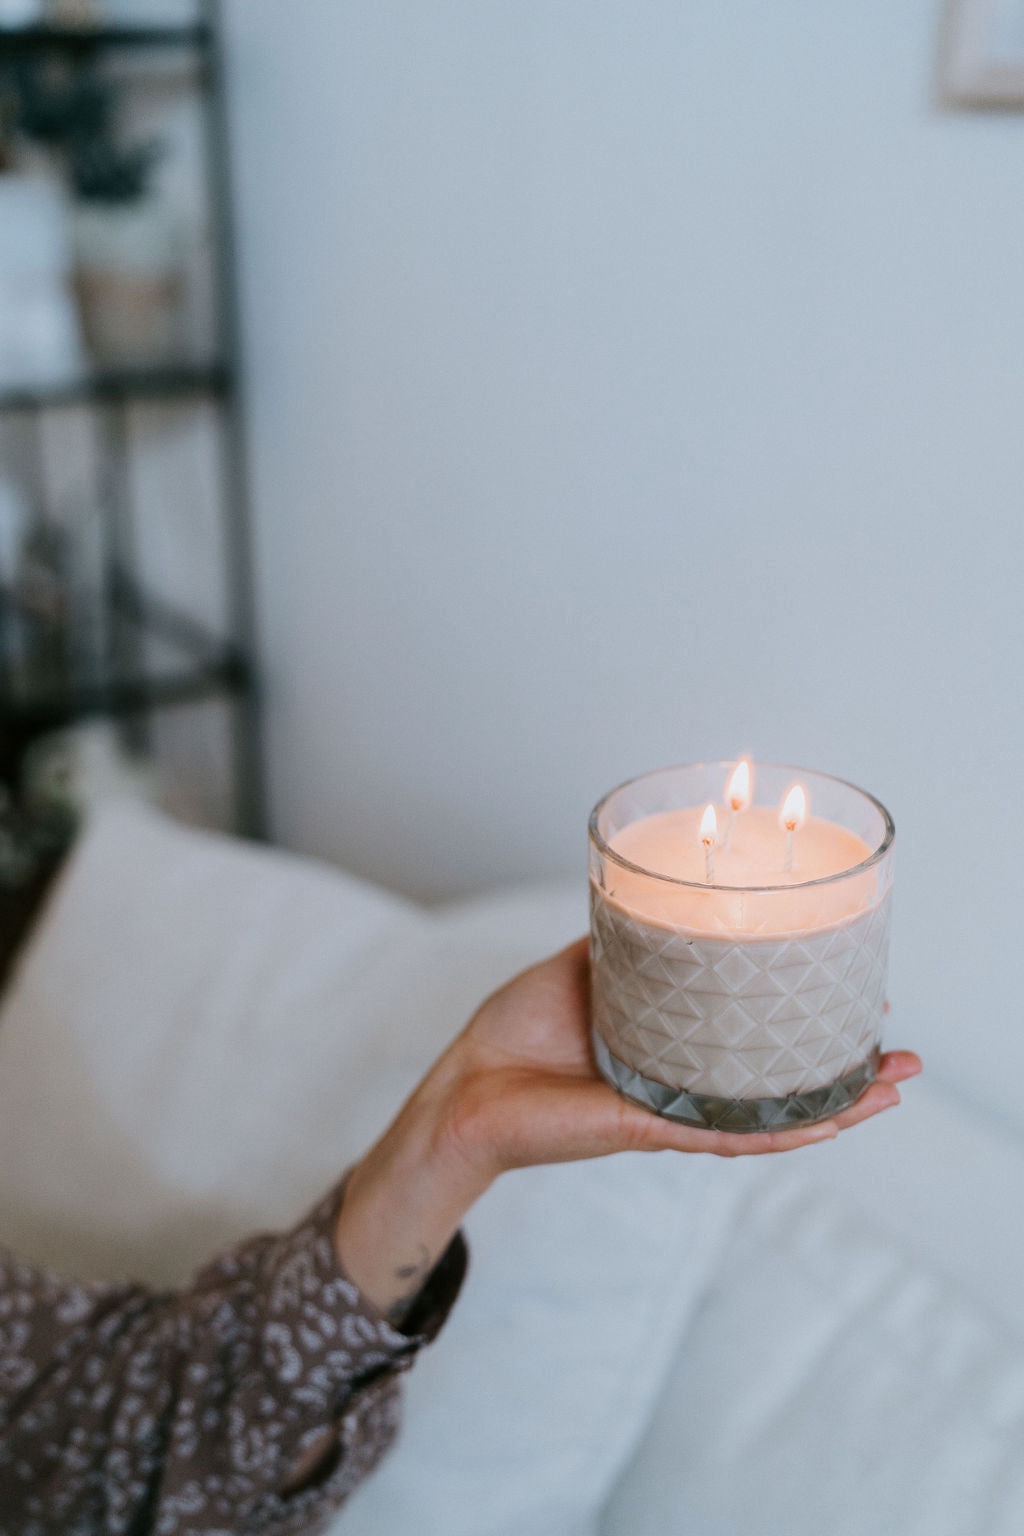 A Symphony of Scents: Crafting Tranquility and Warmth with Cinnamon Vanilla, Soothing Lavender Chamomile, and the Elegance of Soy Wax